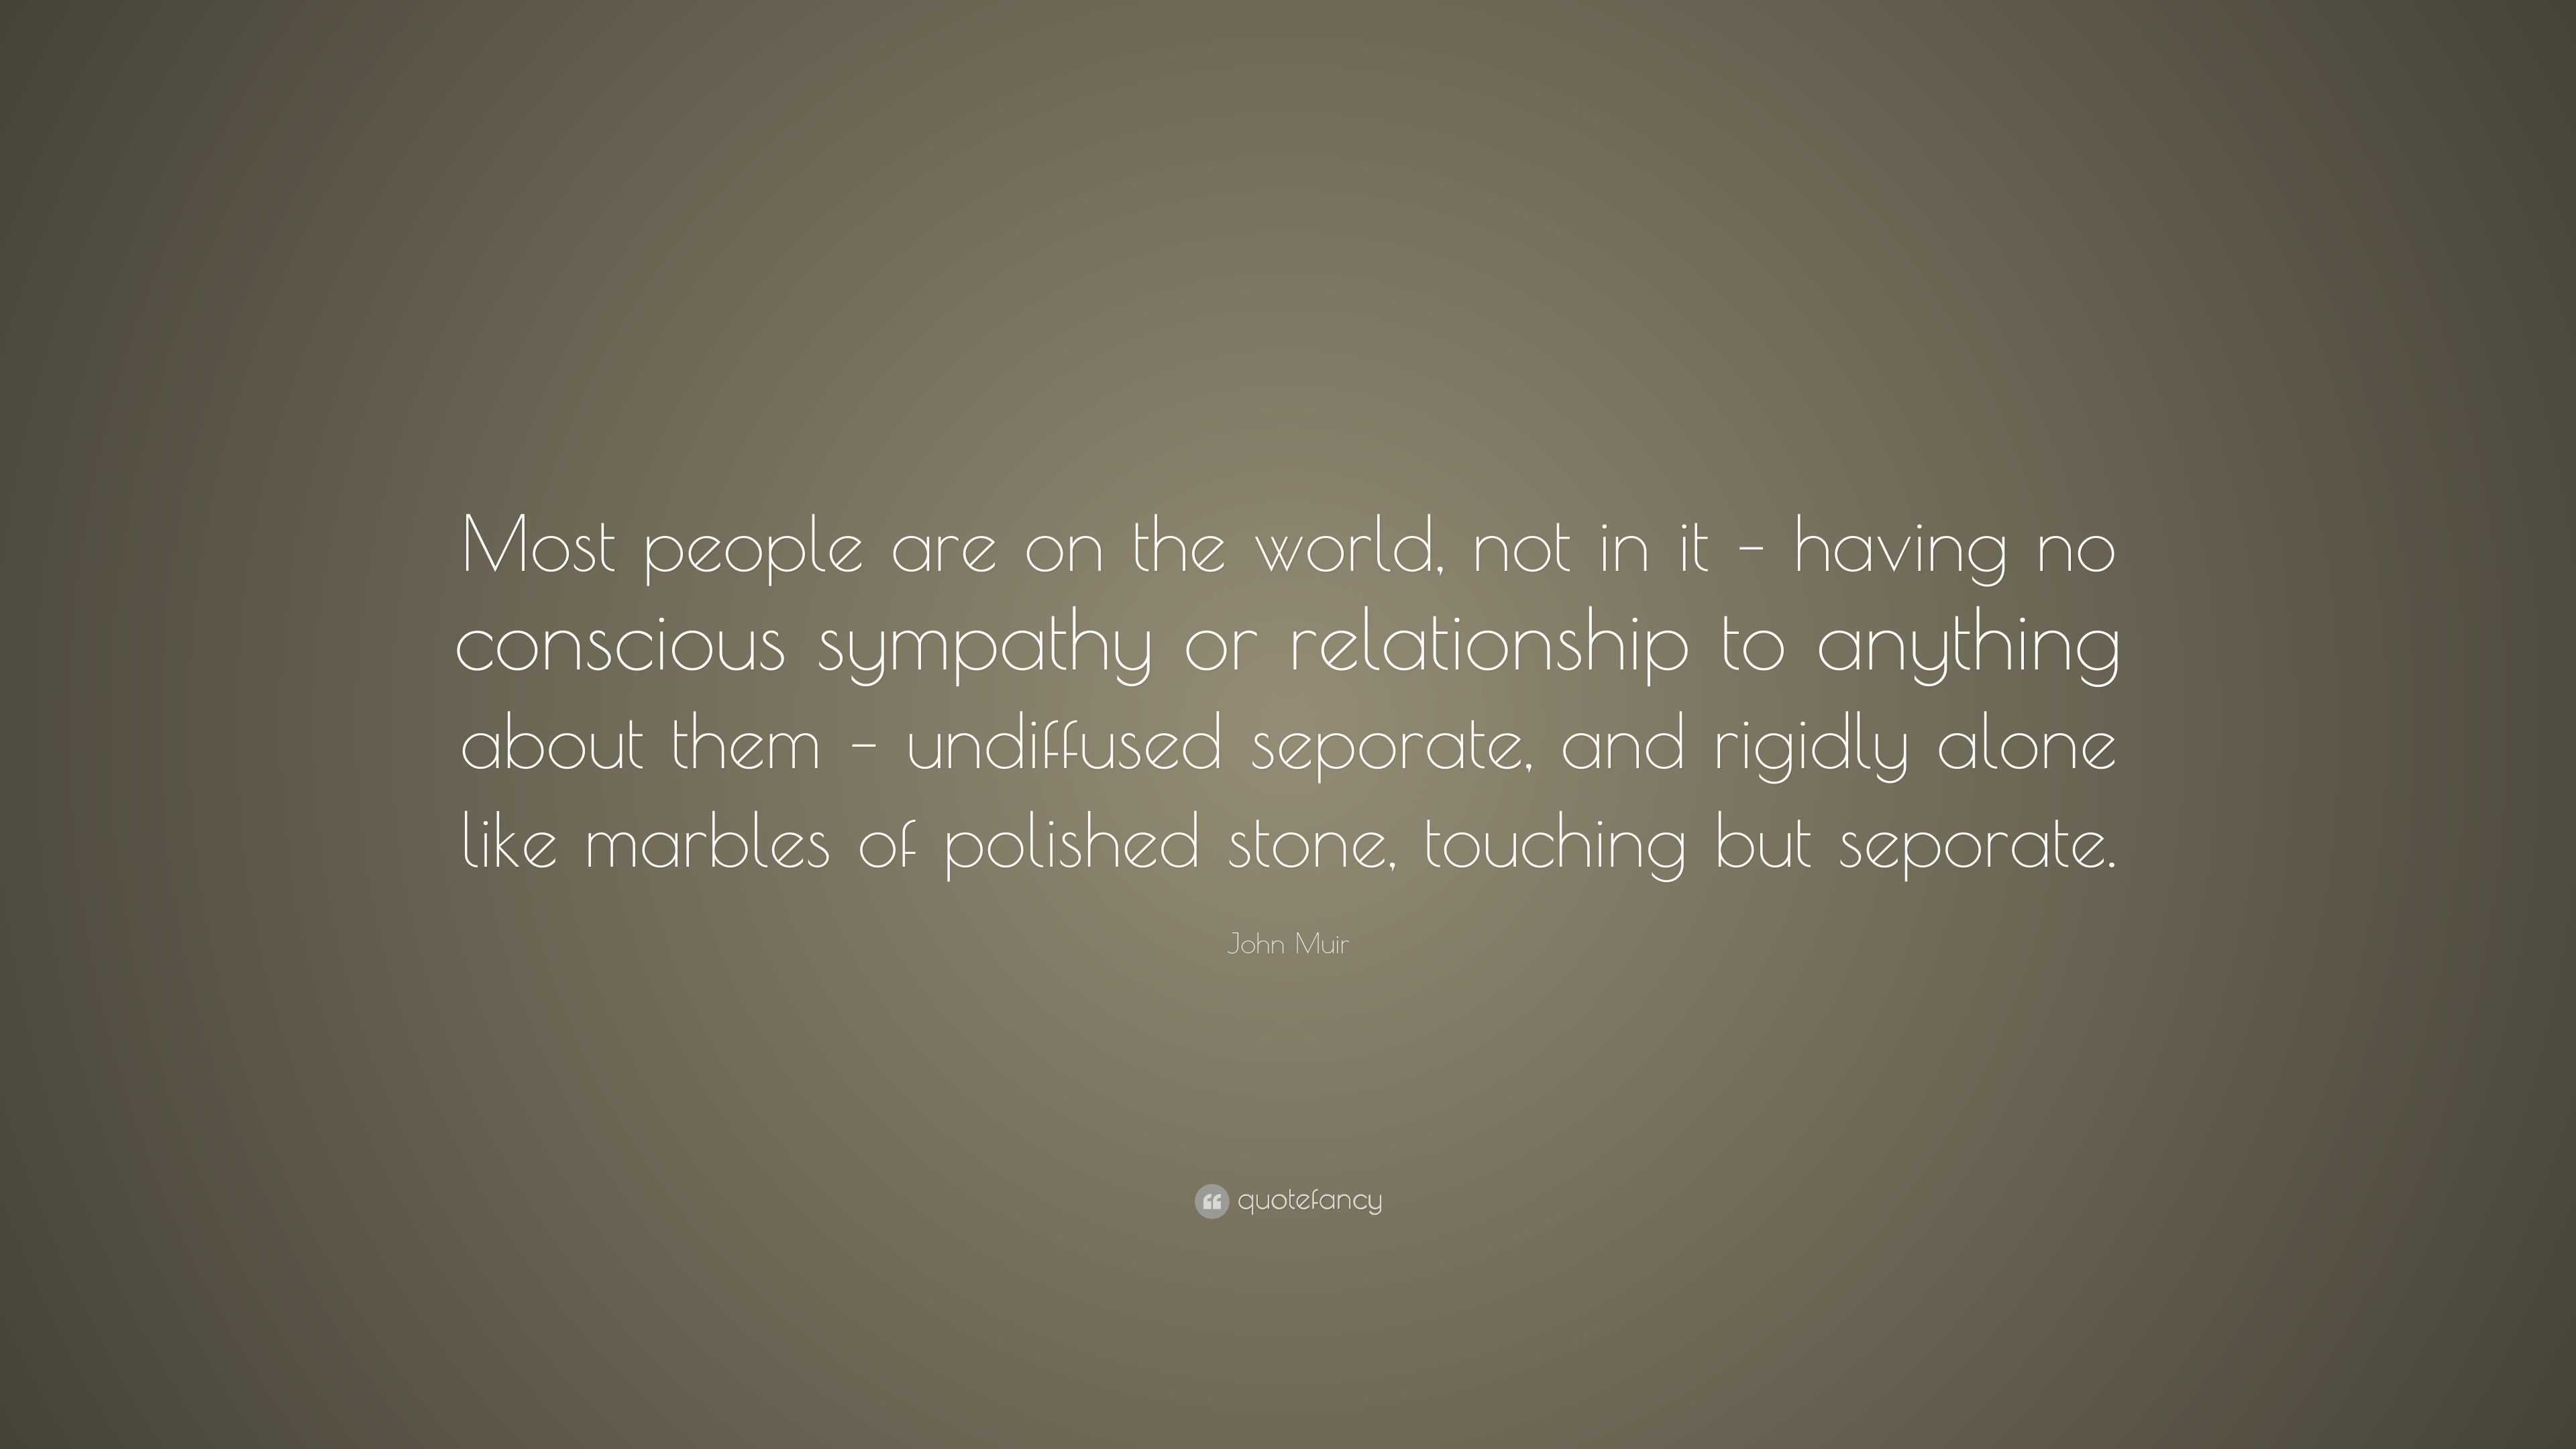 John Muir Quote: “Most people are on the world, not in it – having no ...